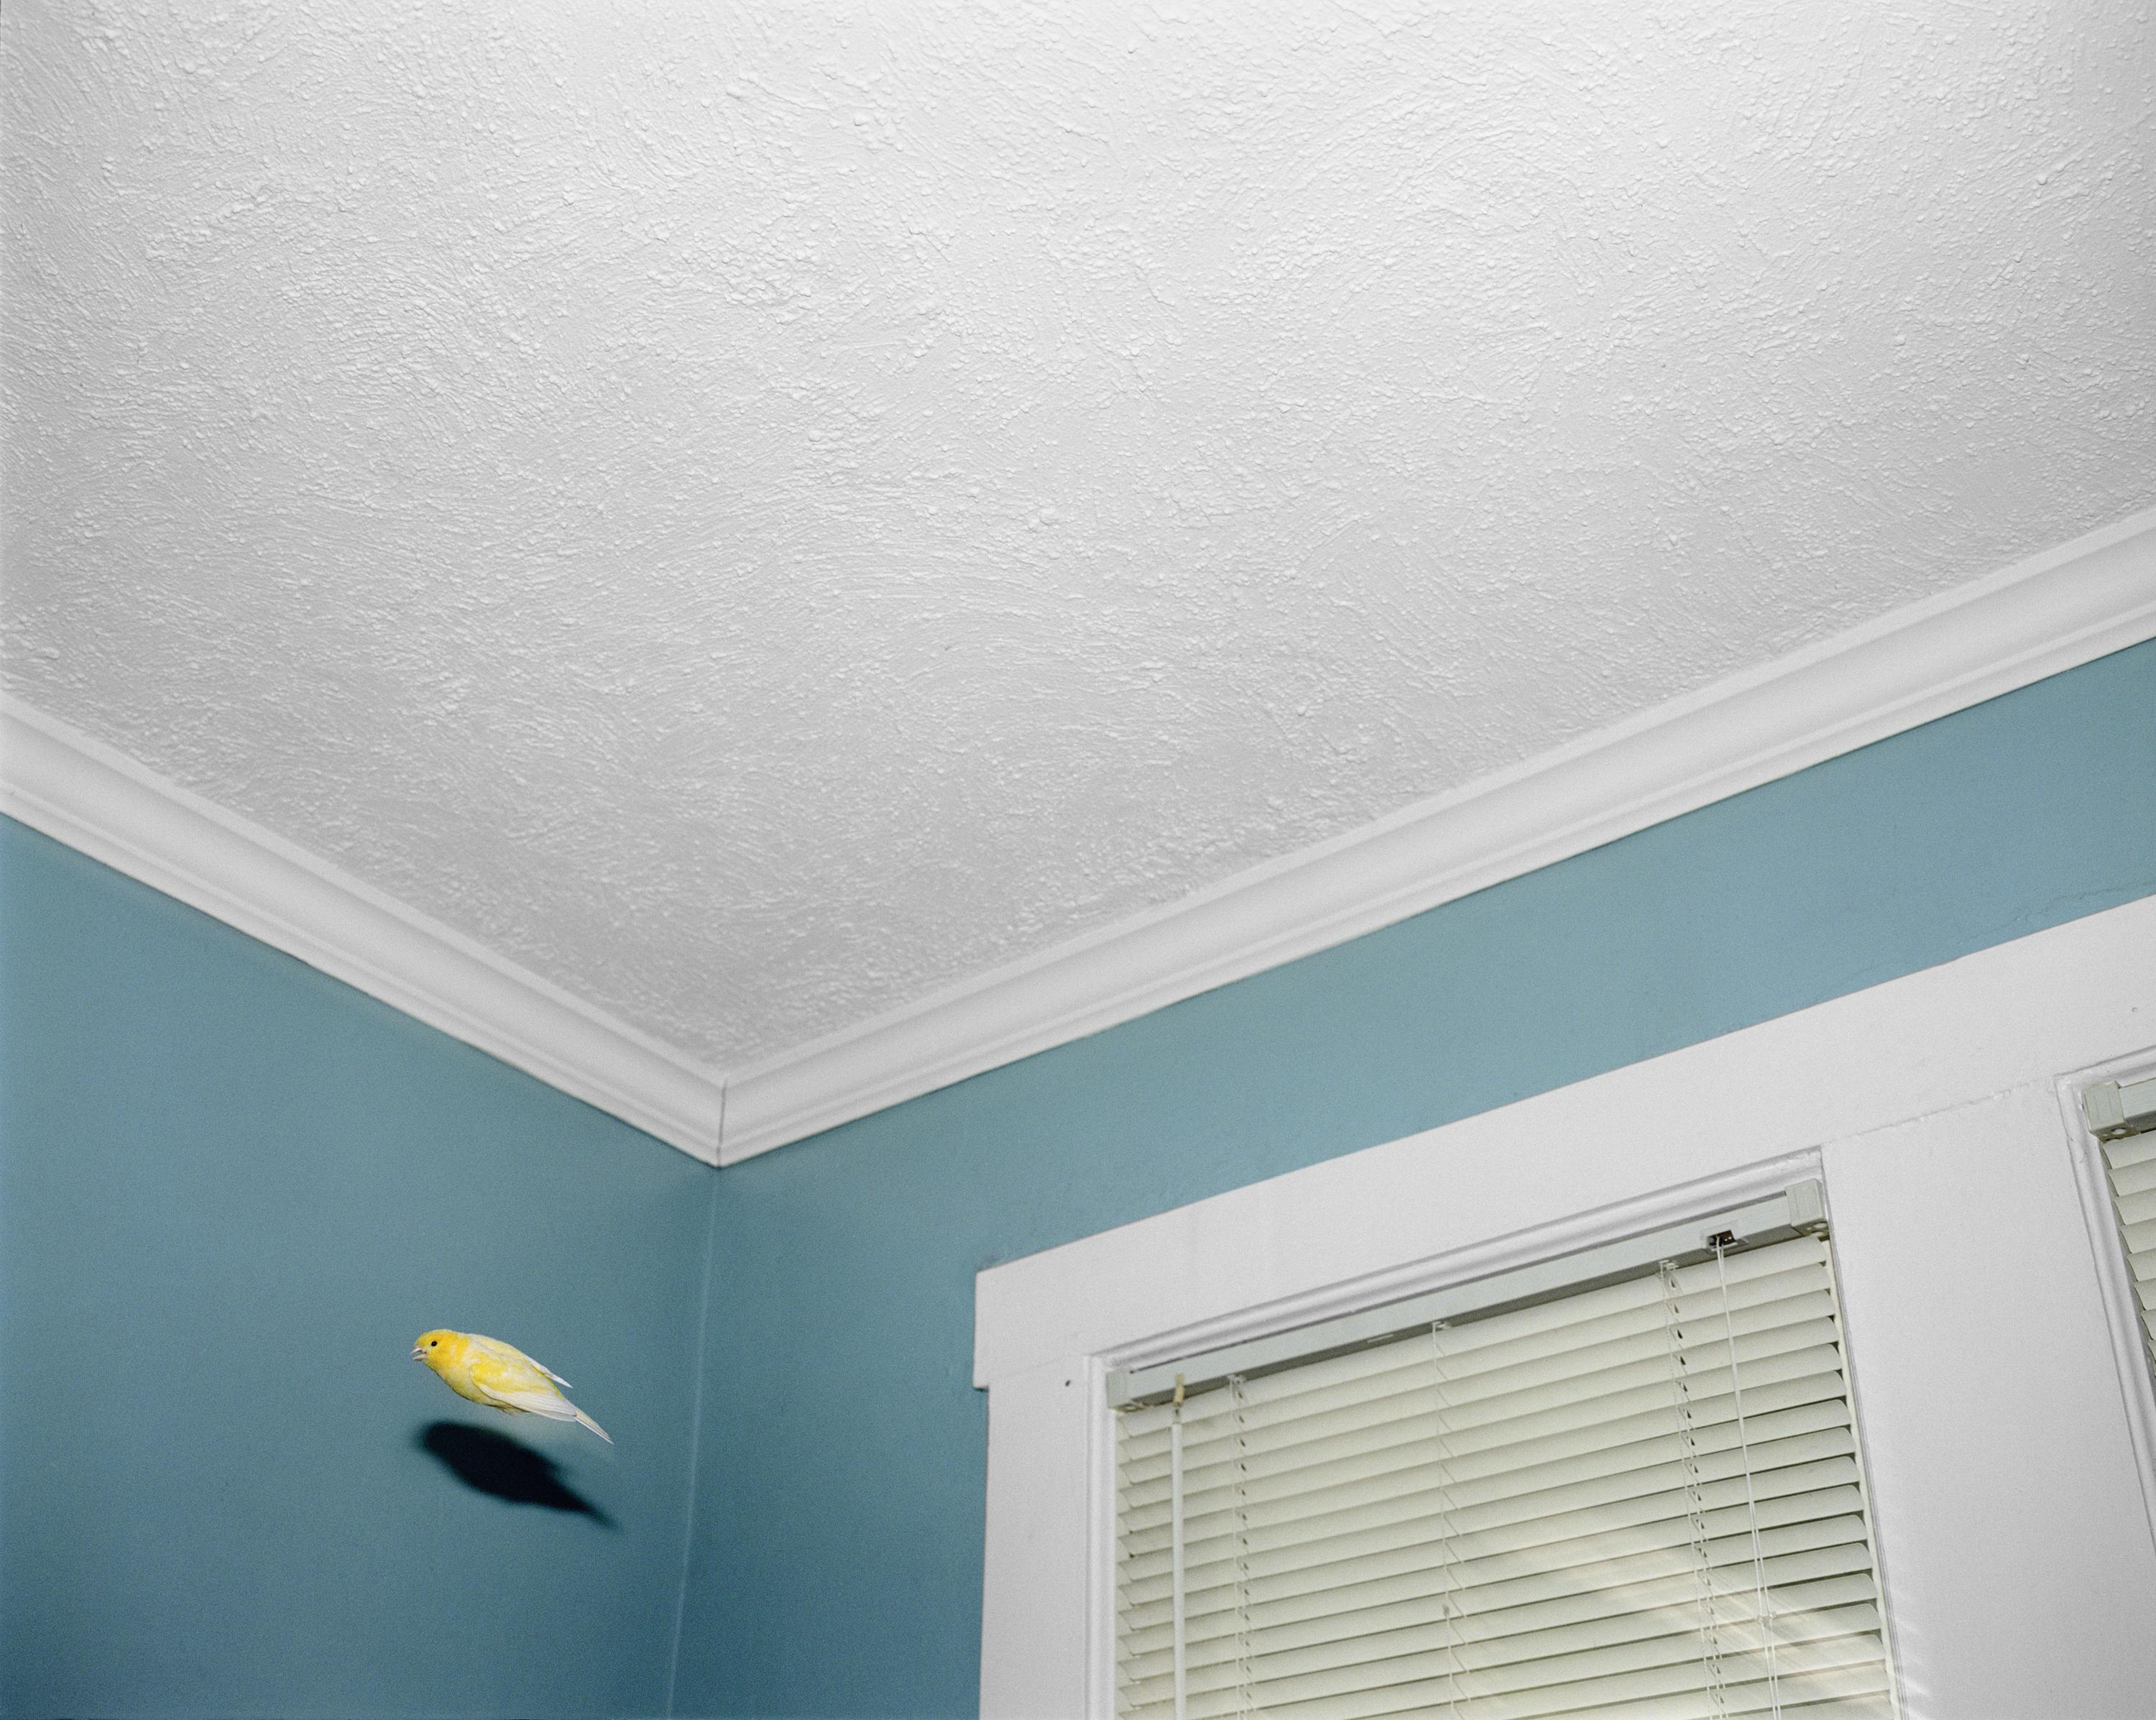 A small yellow bird flies in the corner of a blue room with a white ceiling.